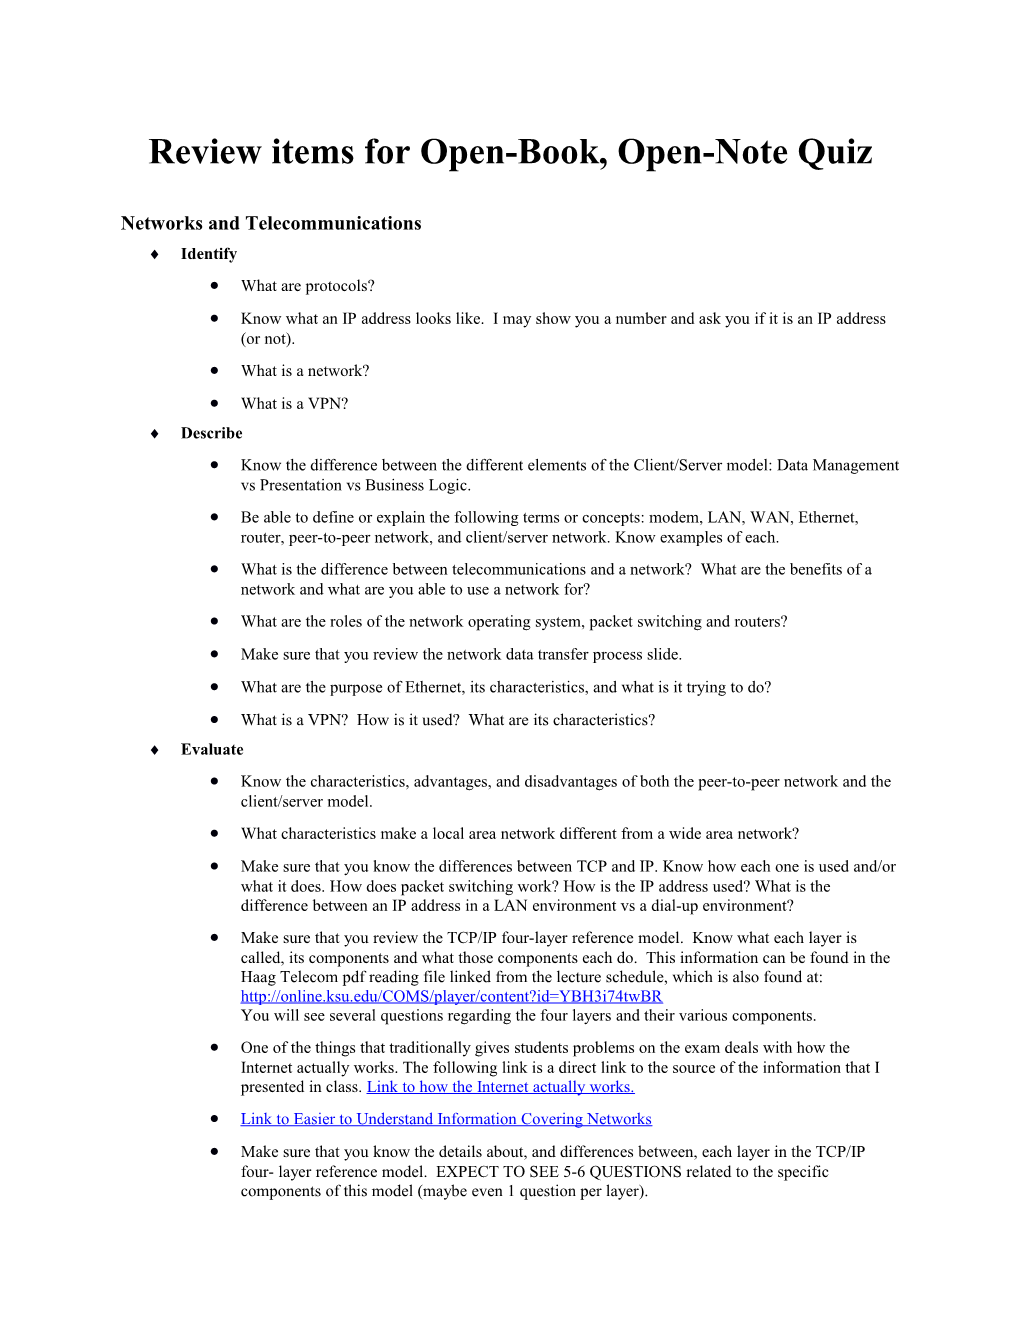 Review Items for Open-Book, Open-Note Quiz